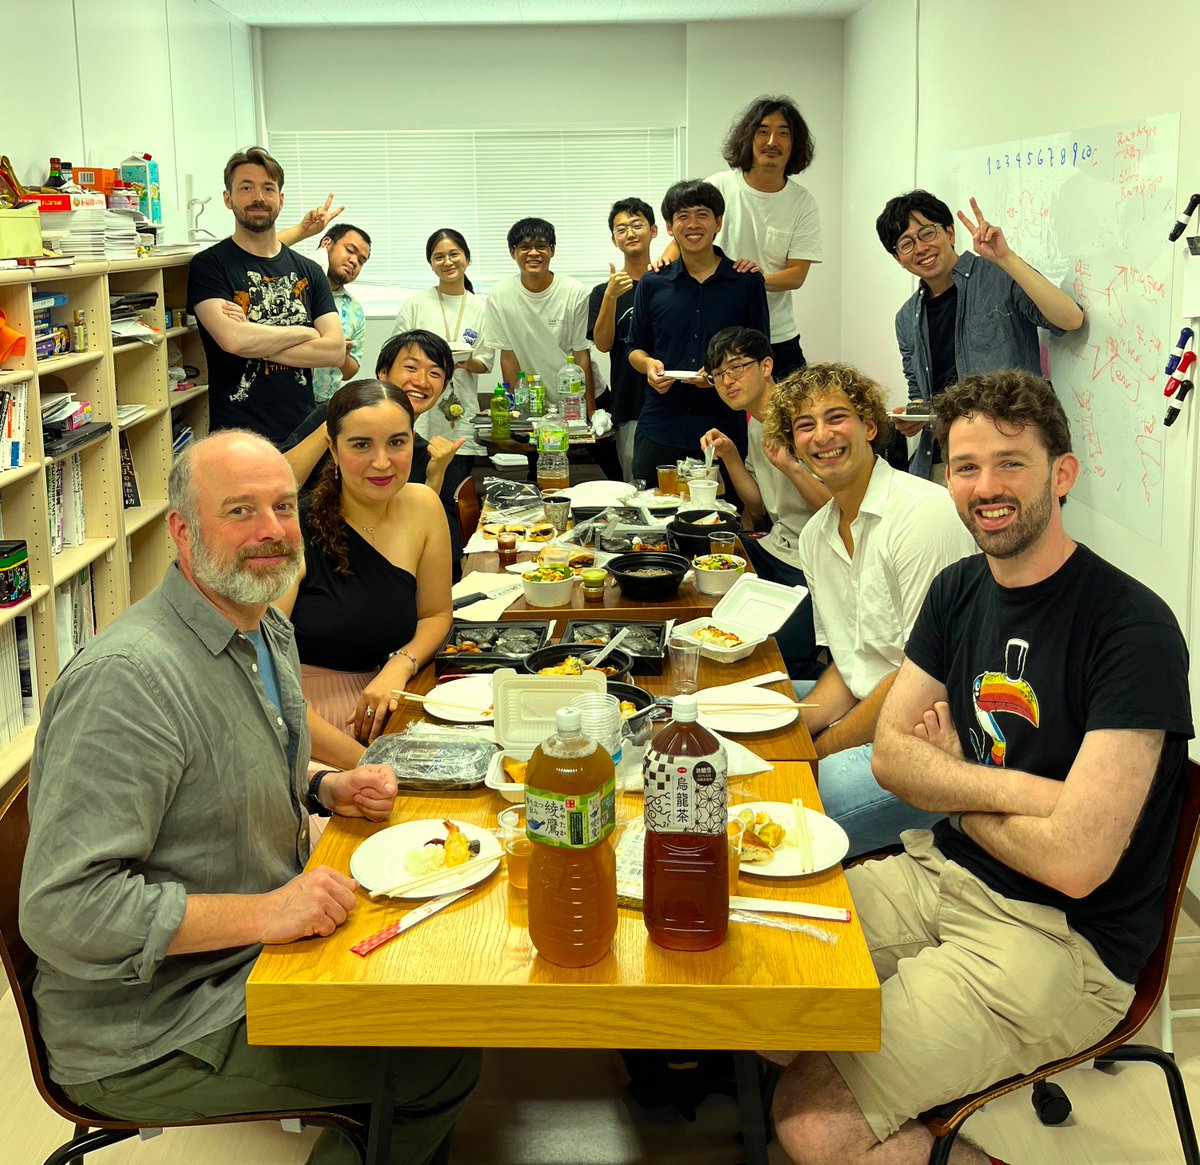 A lunch party in my lab🇯🇵🇬🇧🏴󠁧󠁢󠁳󠁣󠁴󠁿🇩🇪🇫🇷🇵🇭🇹🇭🇨🇳🇮🇩🇺🇸 Welcome guys @SpyrosLytras @robertson_lab @NchiouaRayhane 🙂!!!